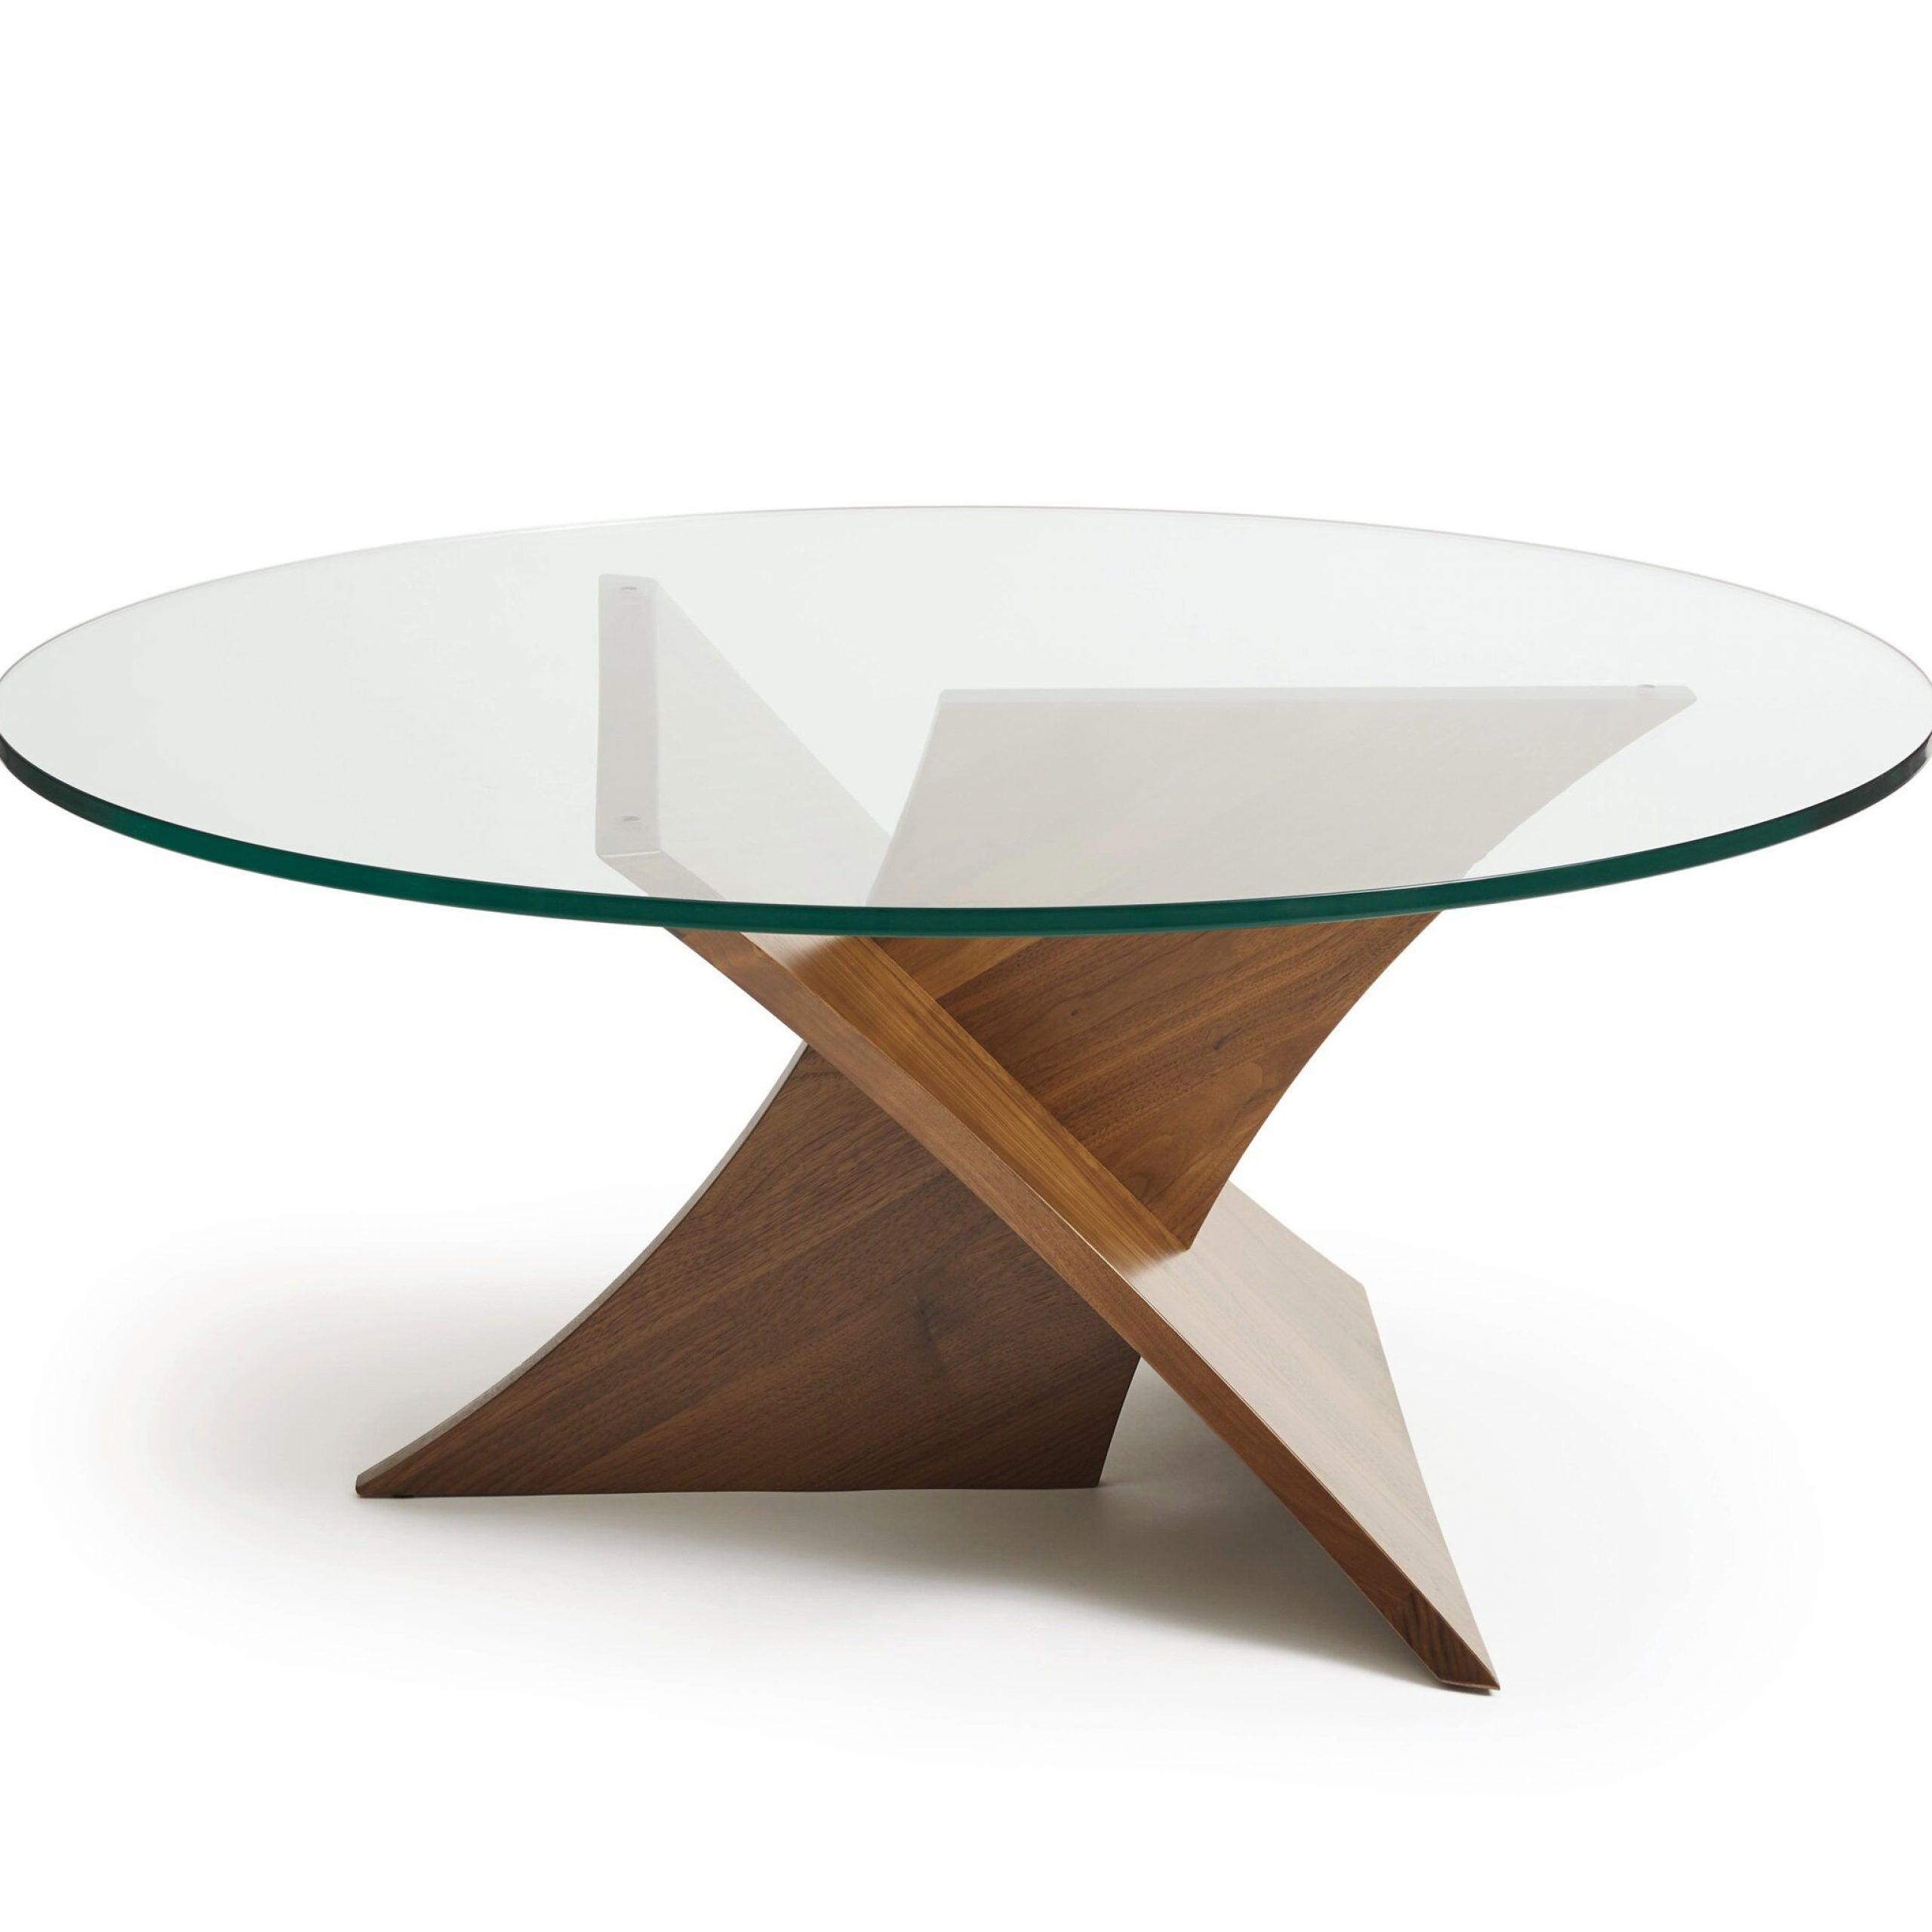 Copeland Furniture Planes Glass Top Coffee Table | Wayfair Within Glass Top Coffee Tables (View 12 of 15)